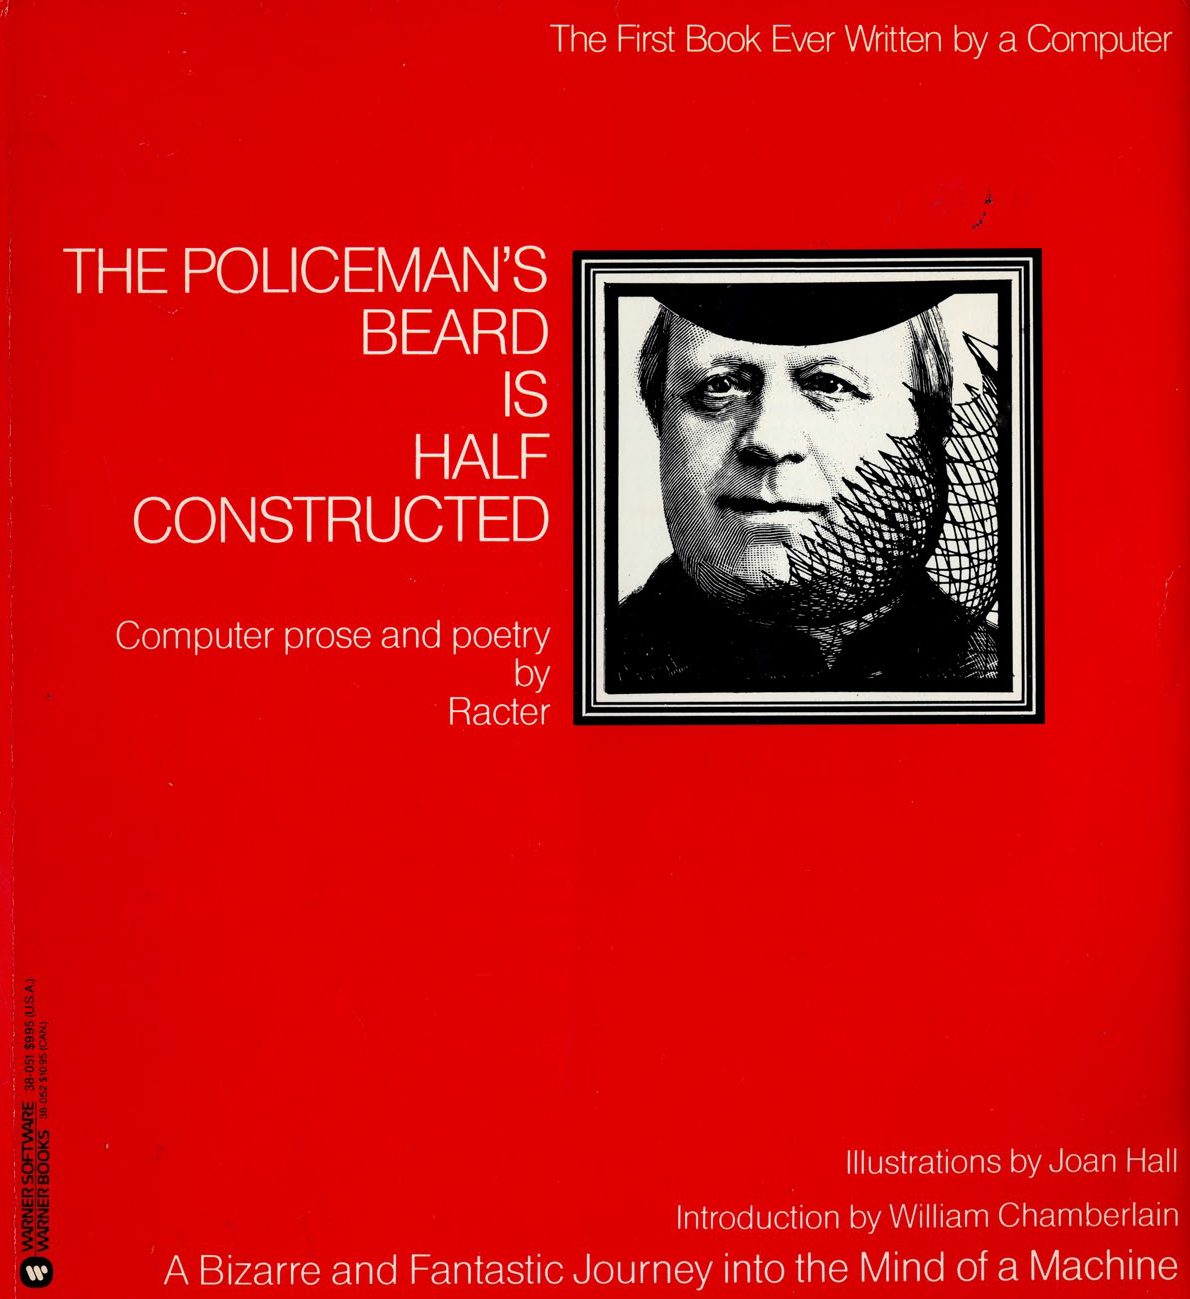 Detail from cover of The Policeman